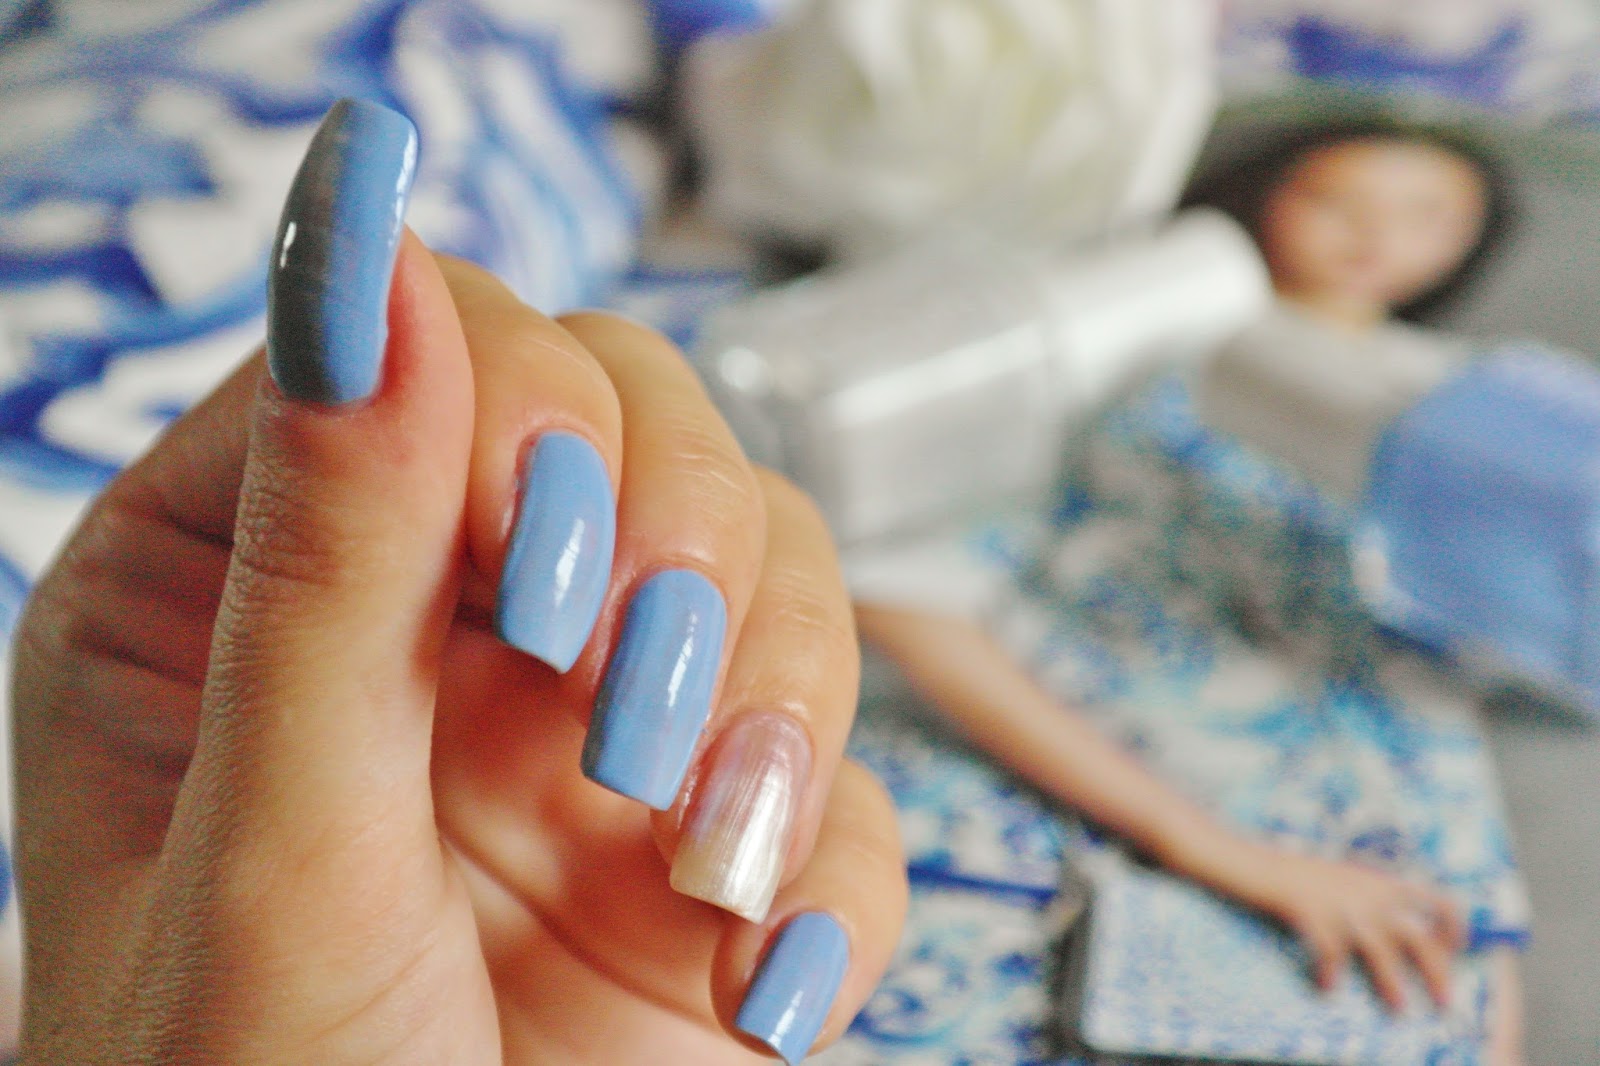 5. "Icy Blue" Winter Pedicure Nail Design - wide 4